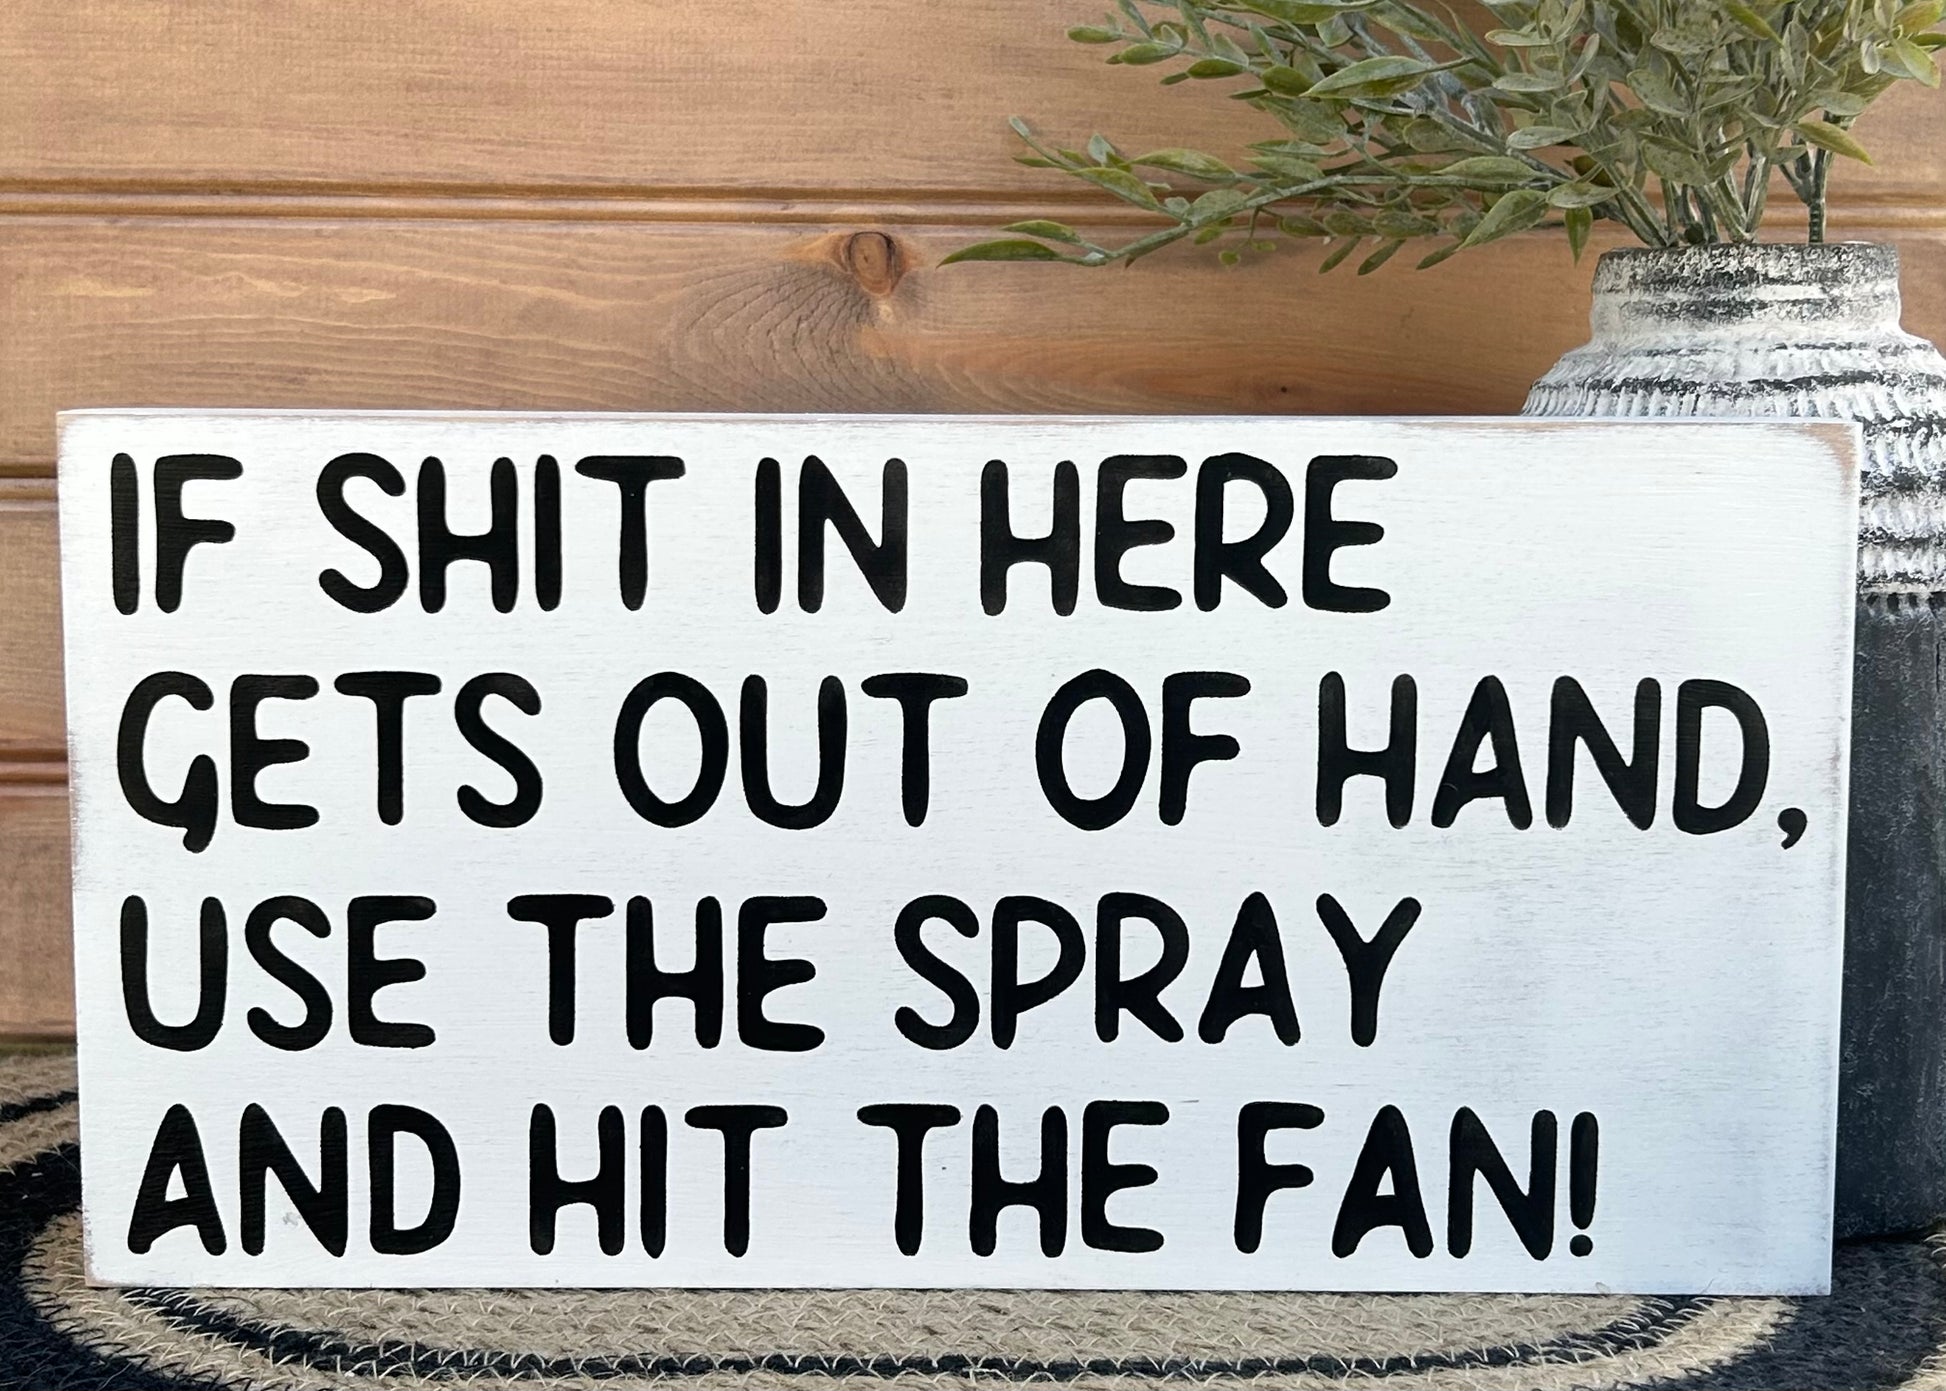 "Shit gets out of hand" funny wood sign